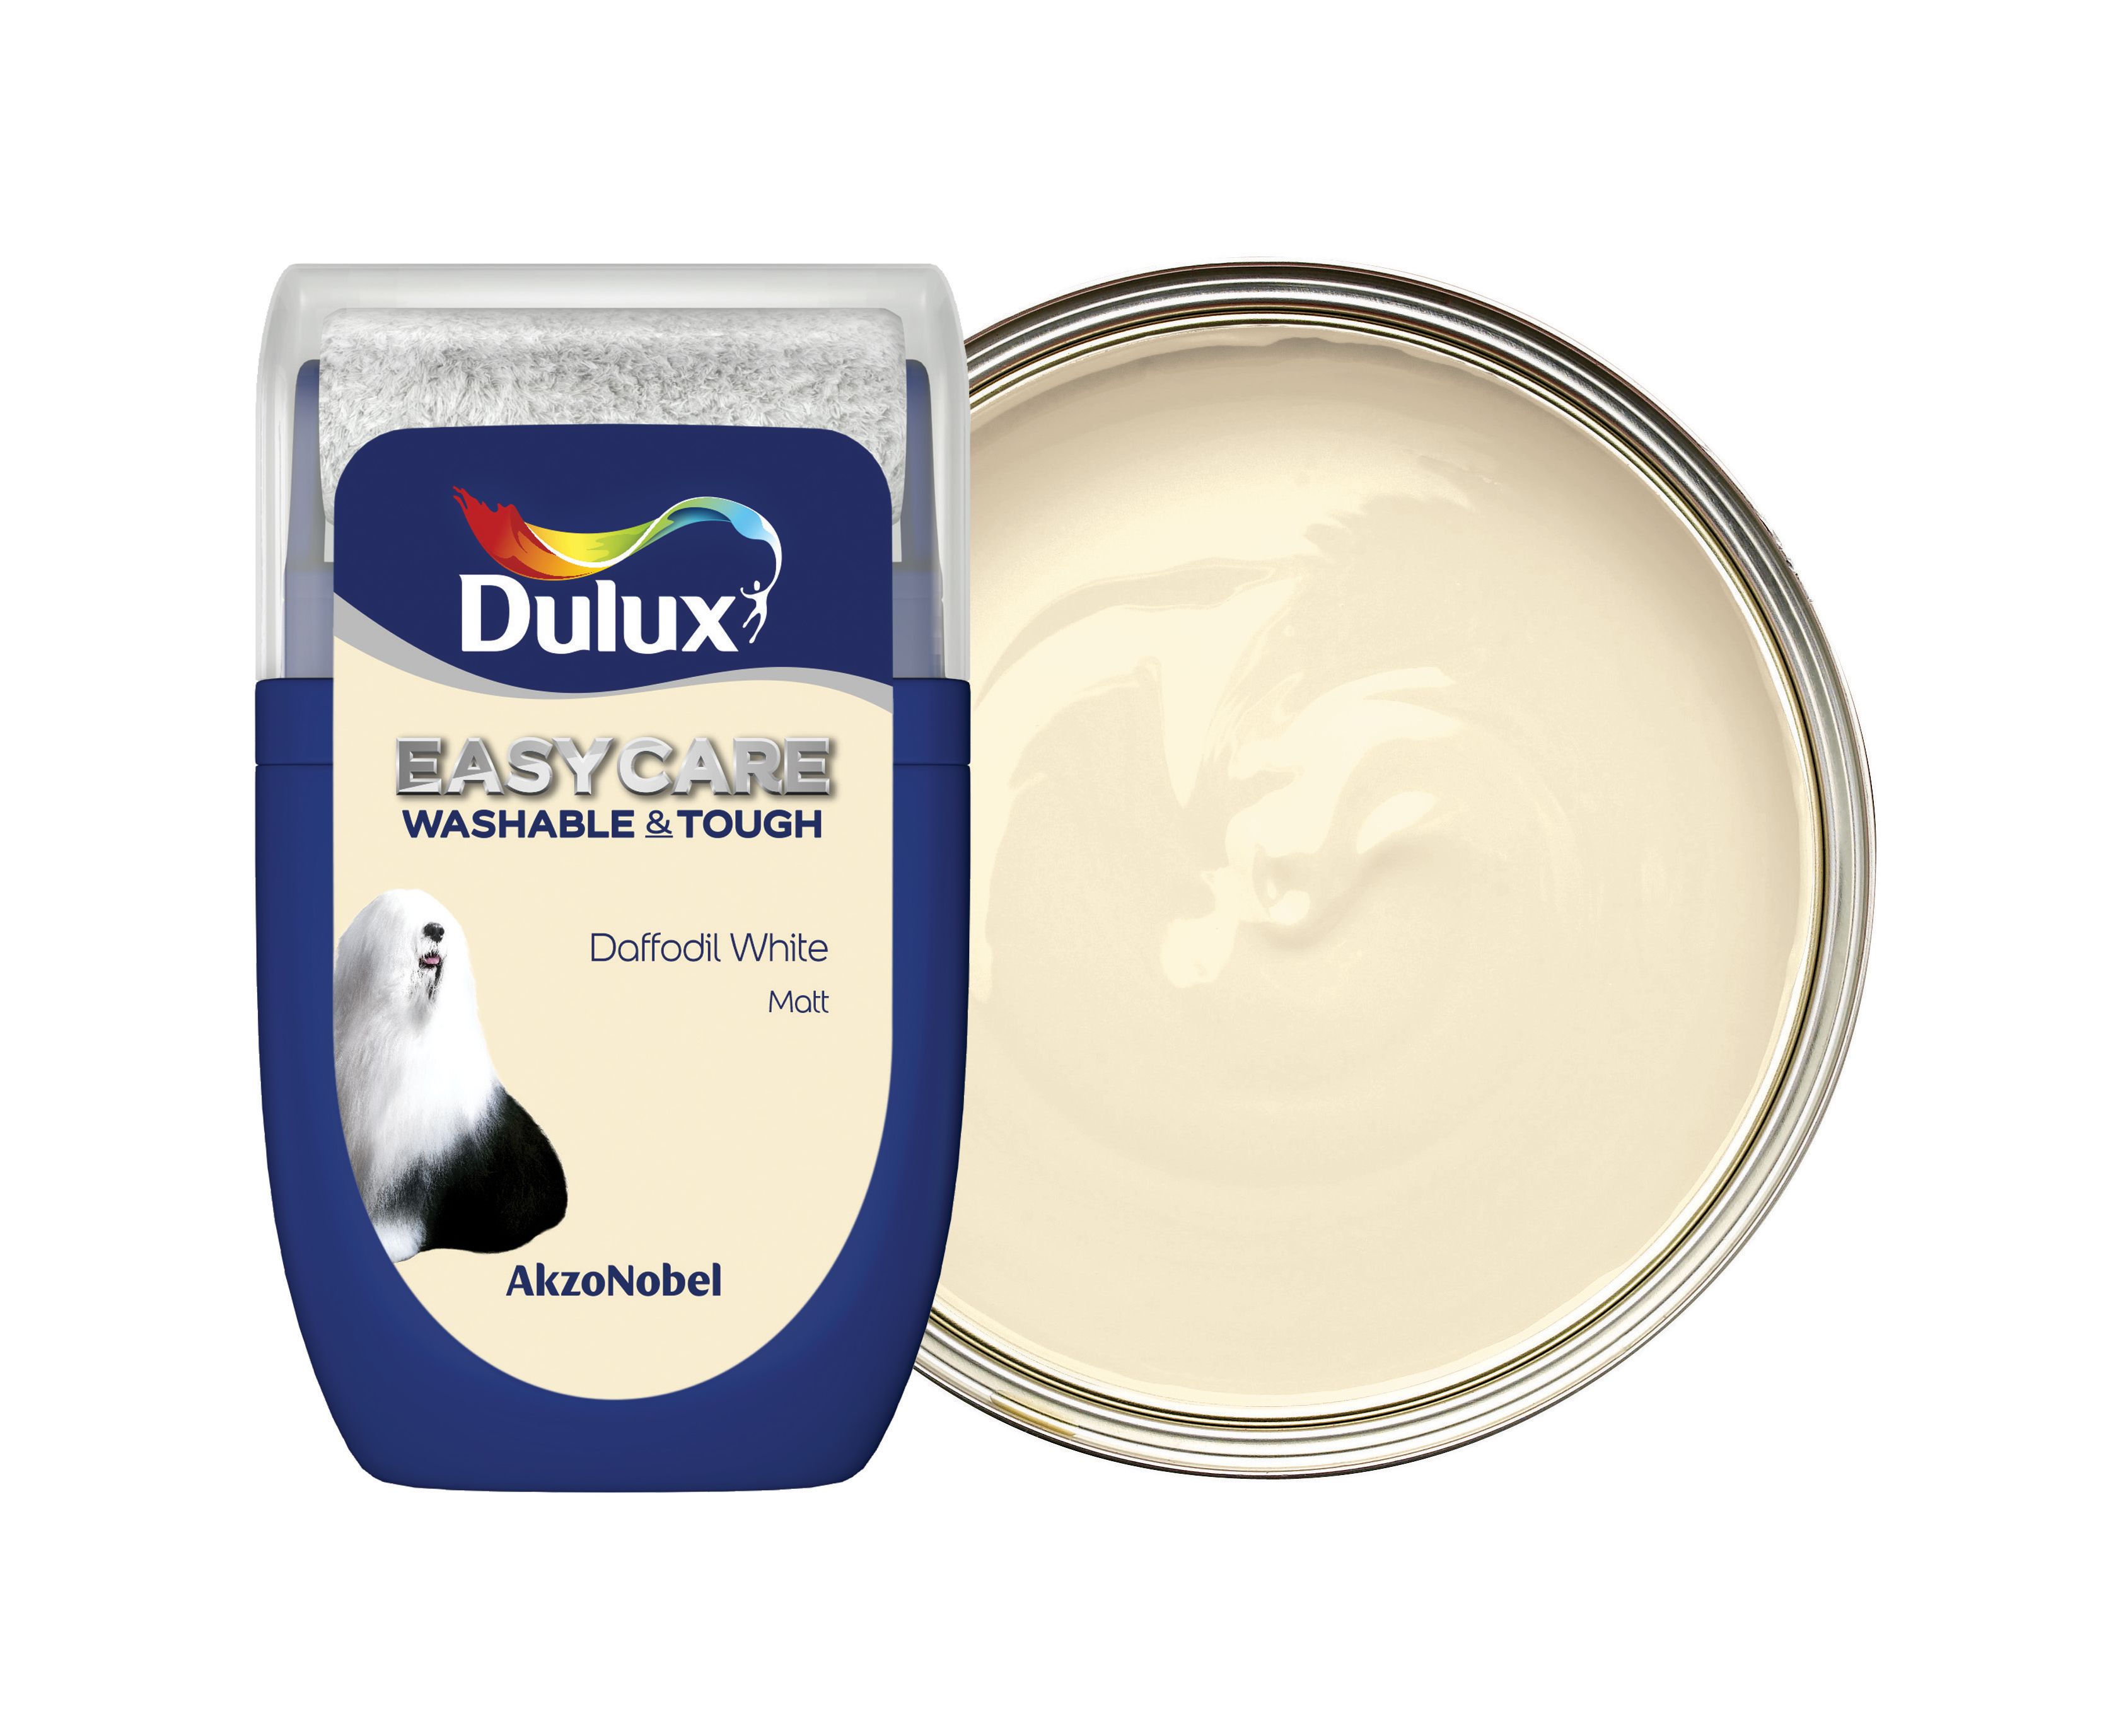 Image of Dulux Easycare Washable & Tough Paint - Daffodil White Tester Pot - 30ml